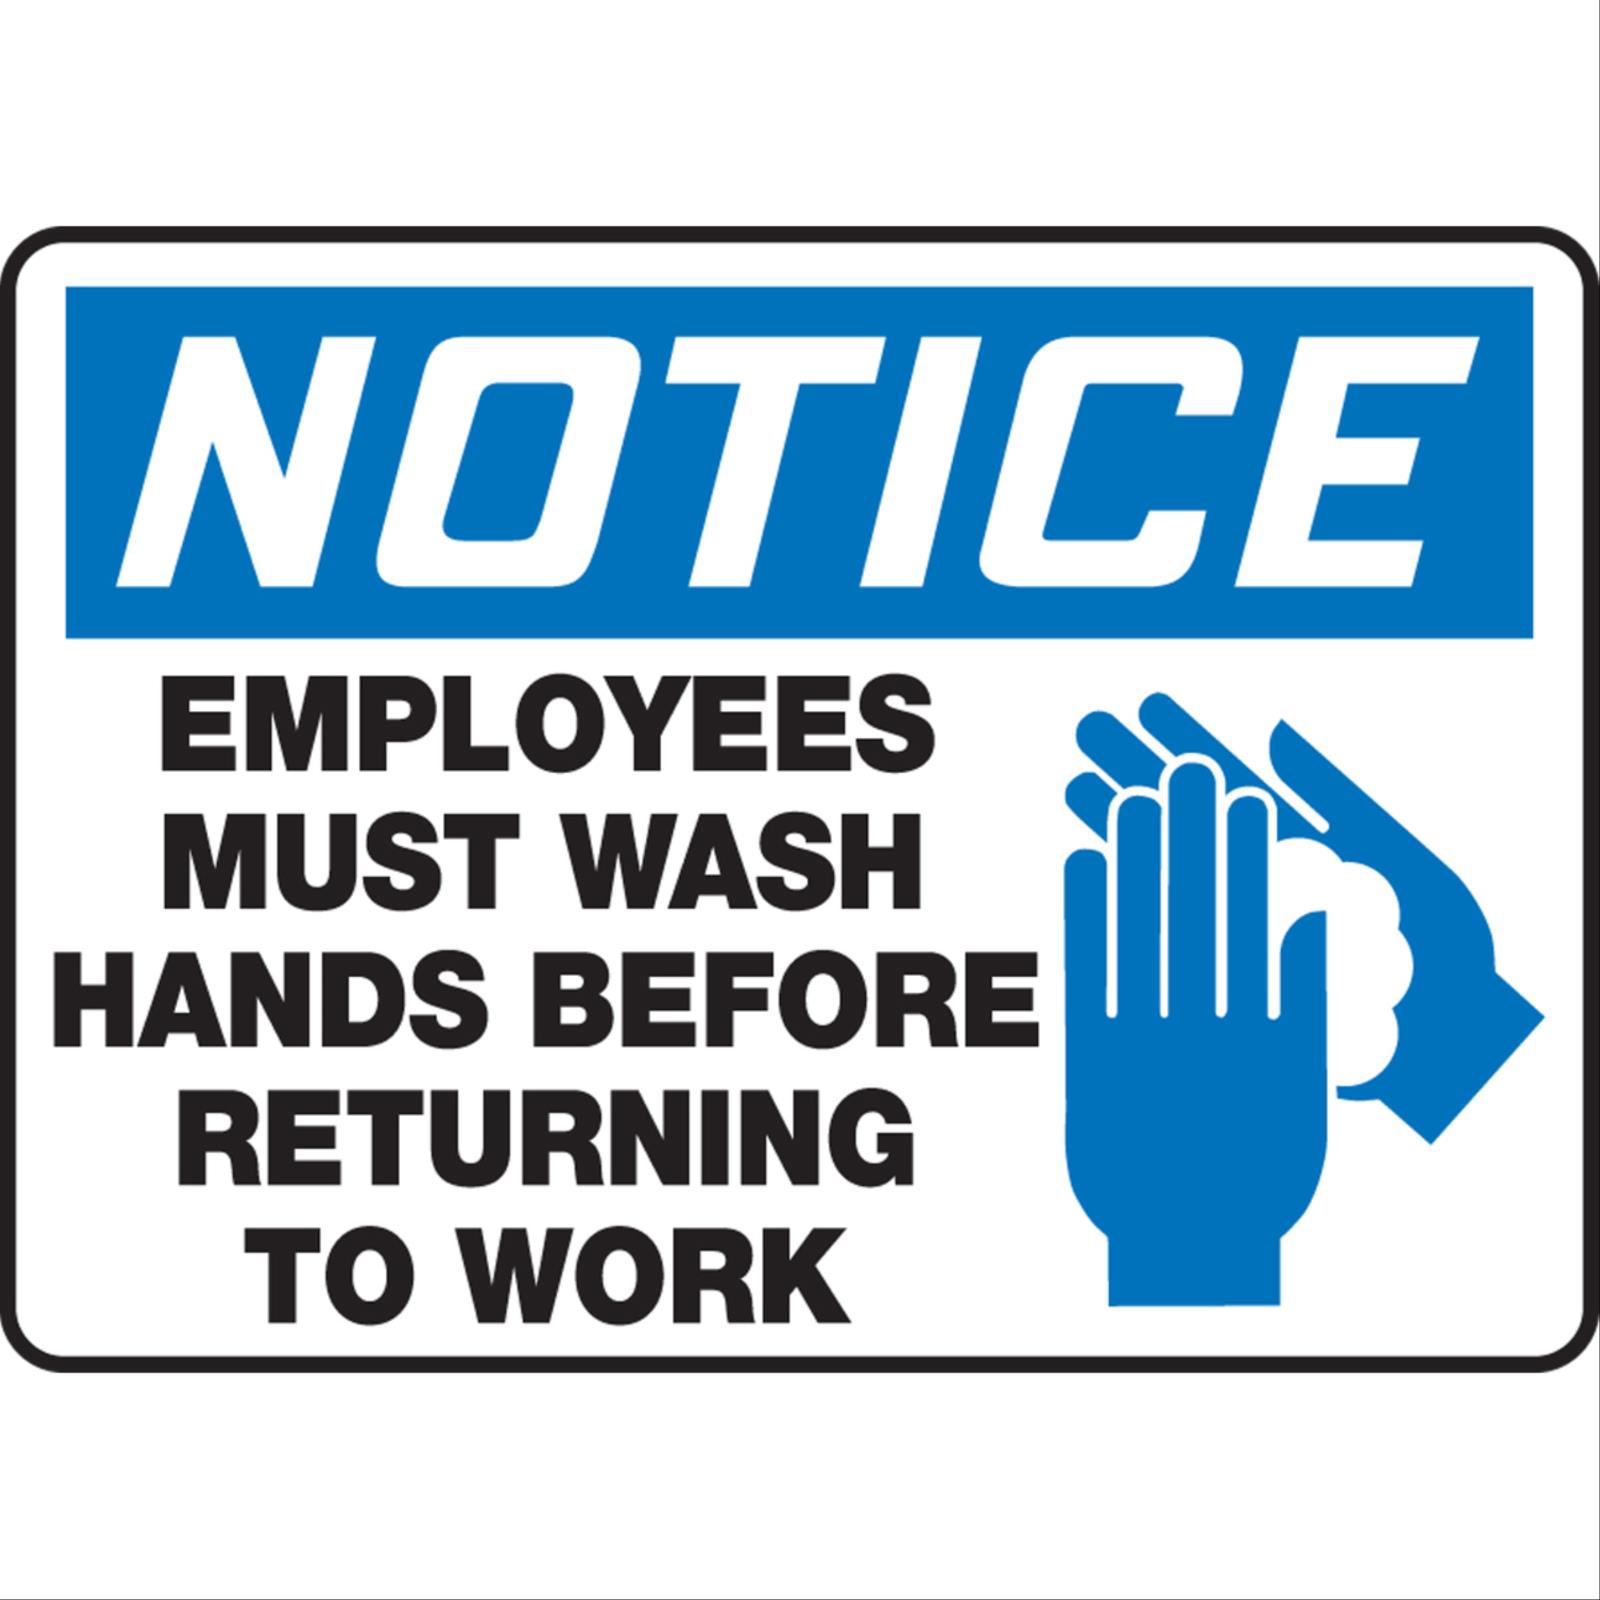 Notice, Employees Must Wash Hands Before Returning To Work Signs, COVID-19